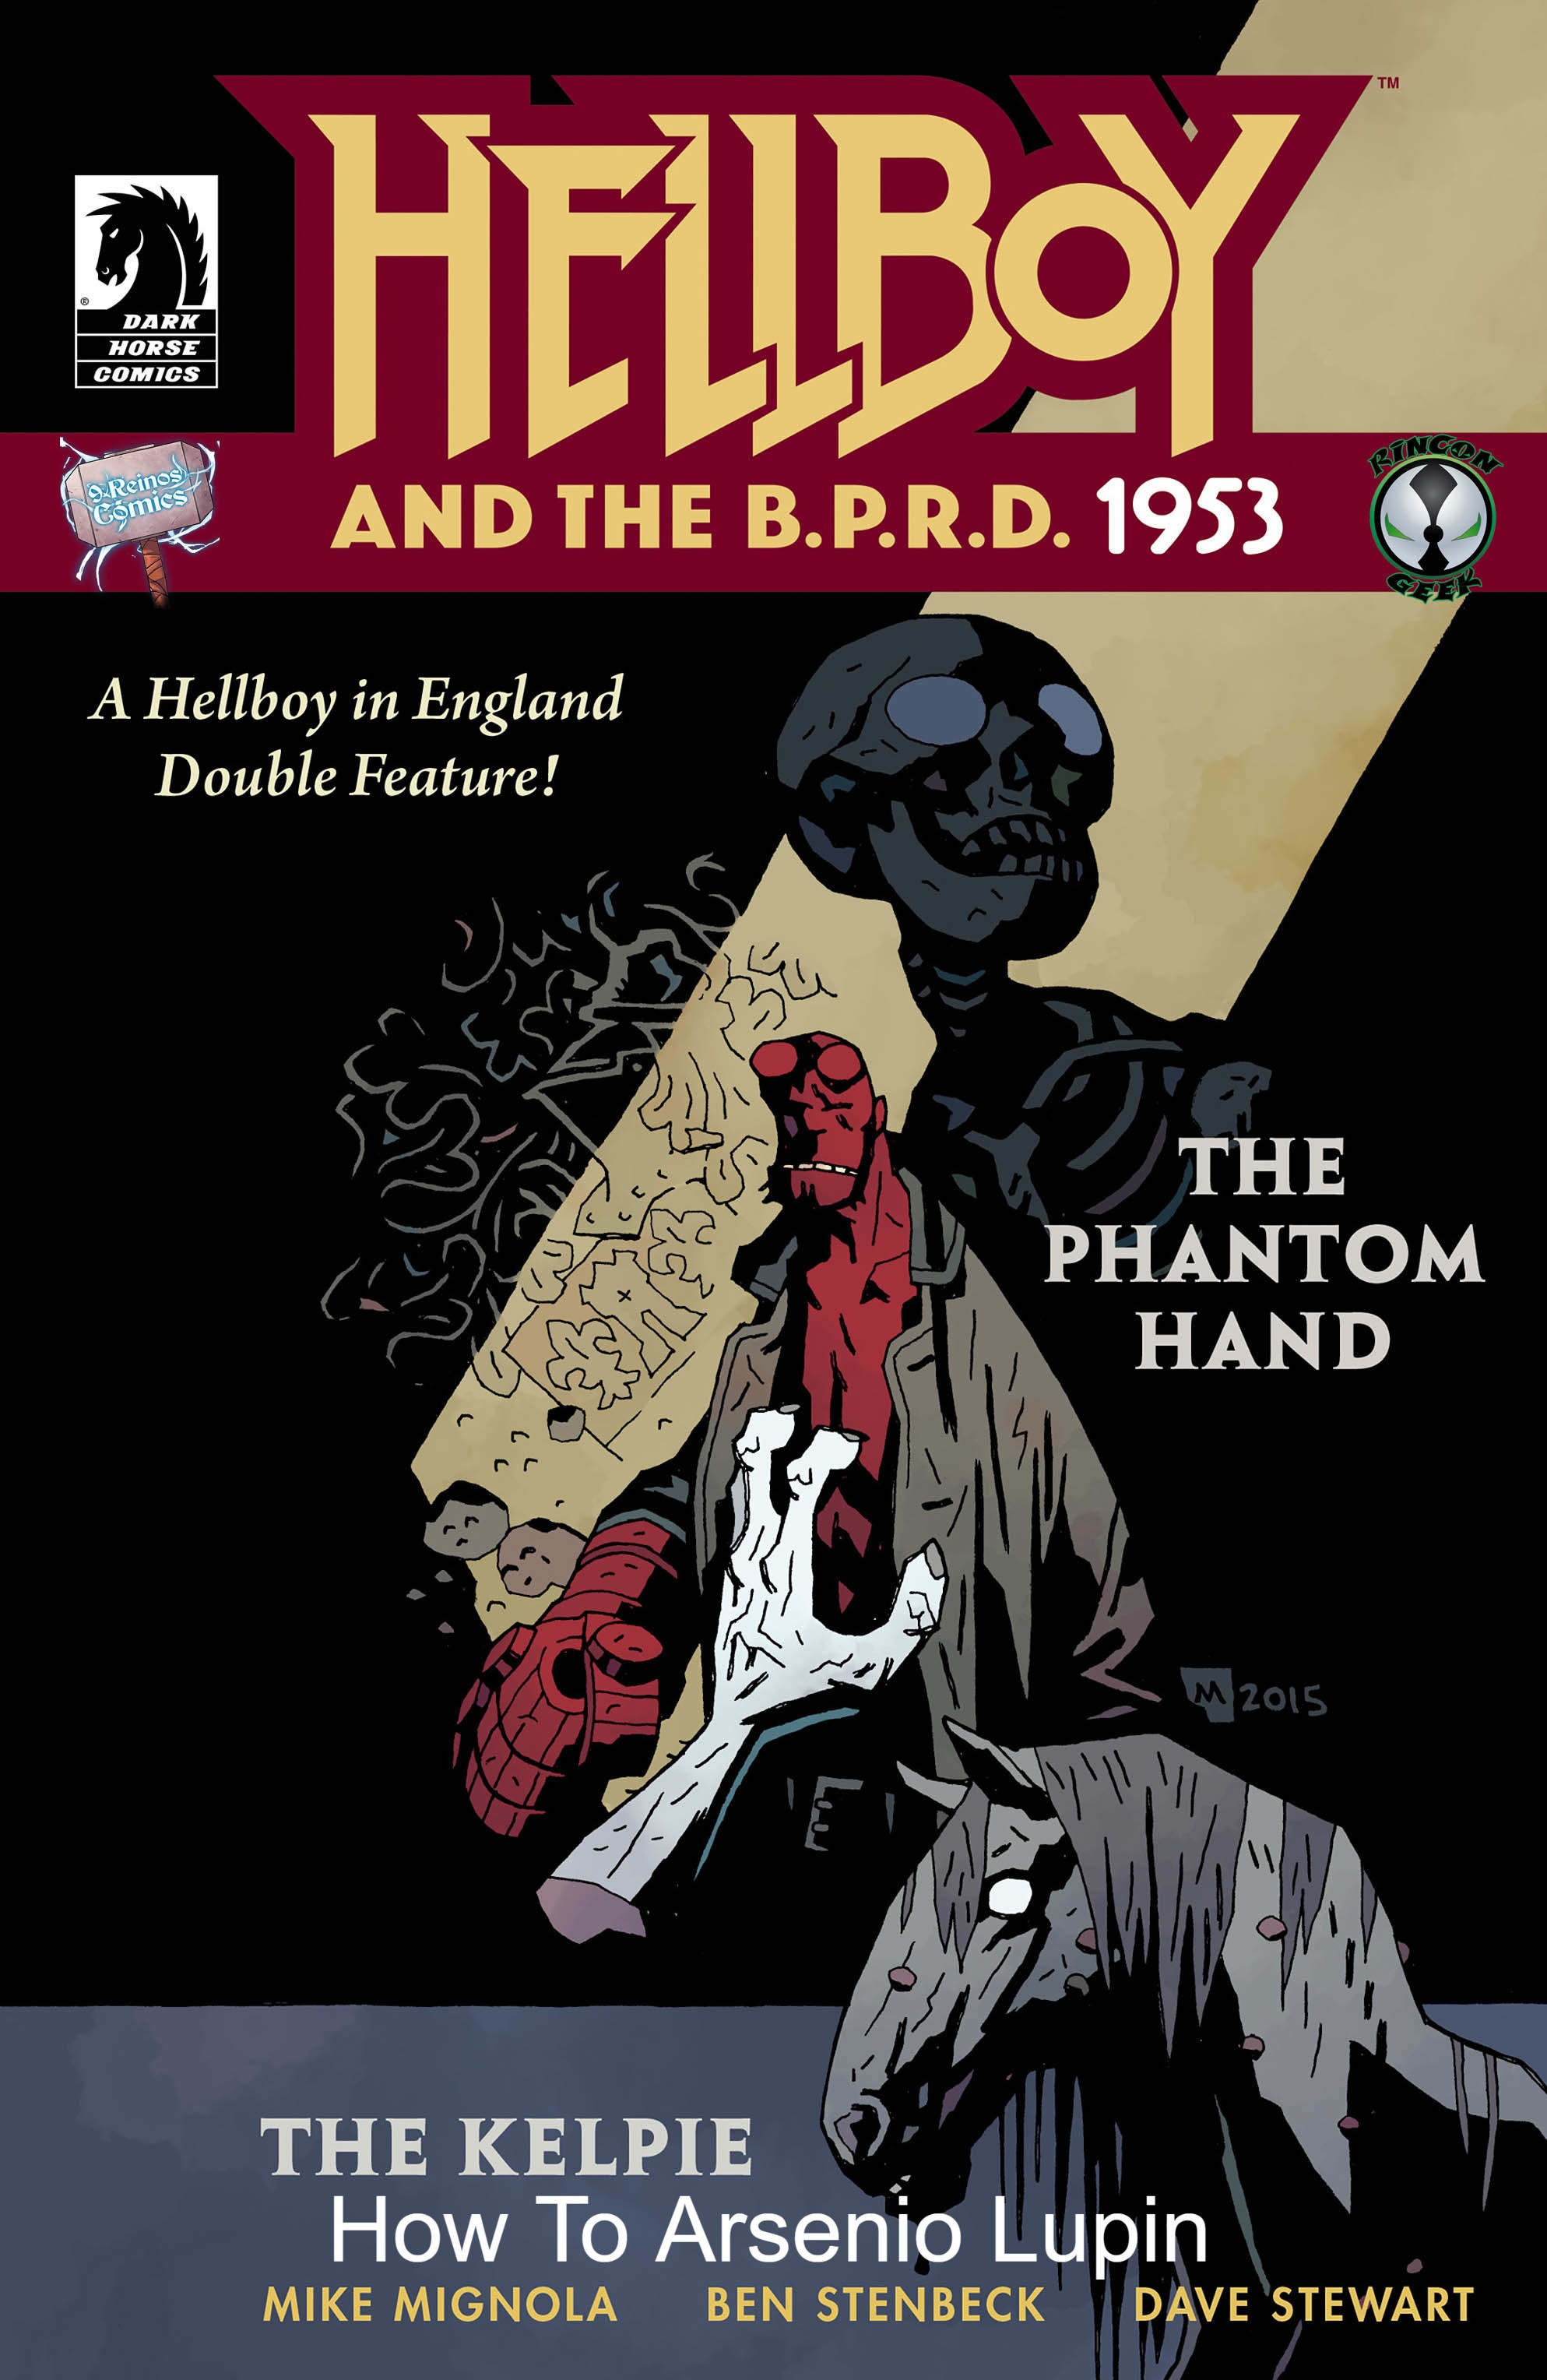 Hellboy and B.P.R.D. 1953